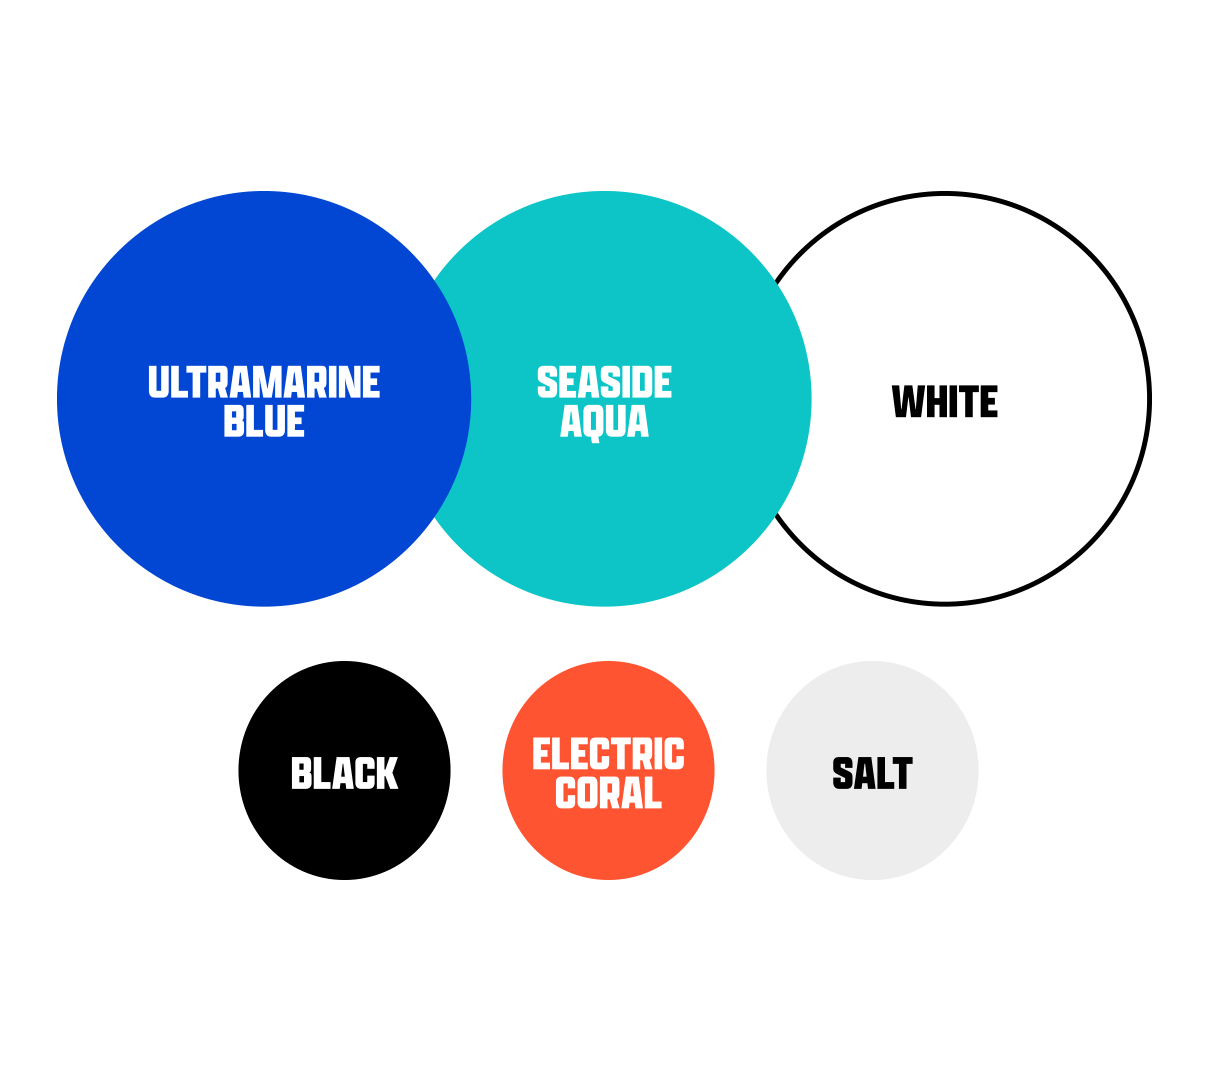 MMW brand colors, featuring a palette of 6 colors with Ultramarine Blue, Seaside Aqua, White, Black, Electric Coral, and Salt